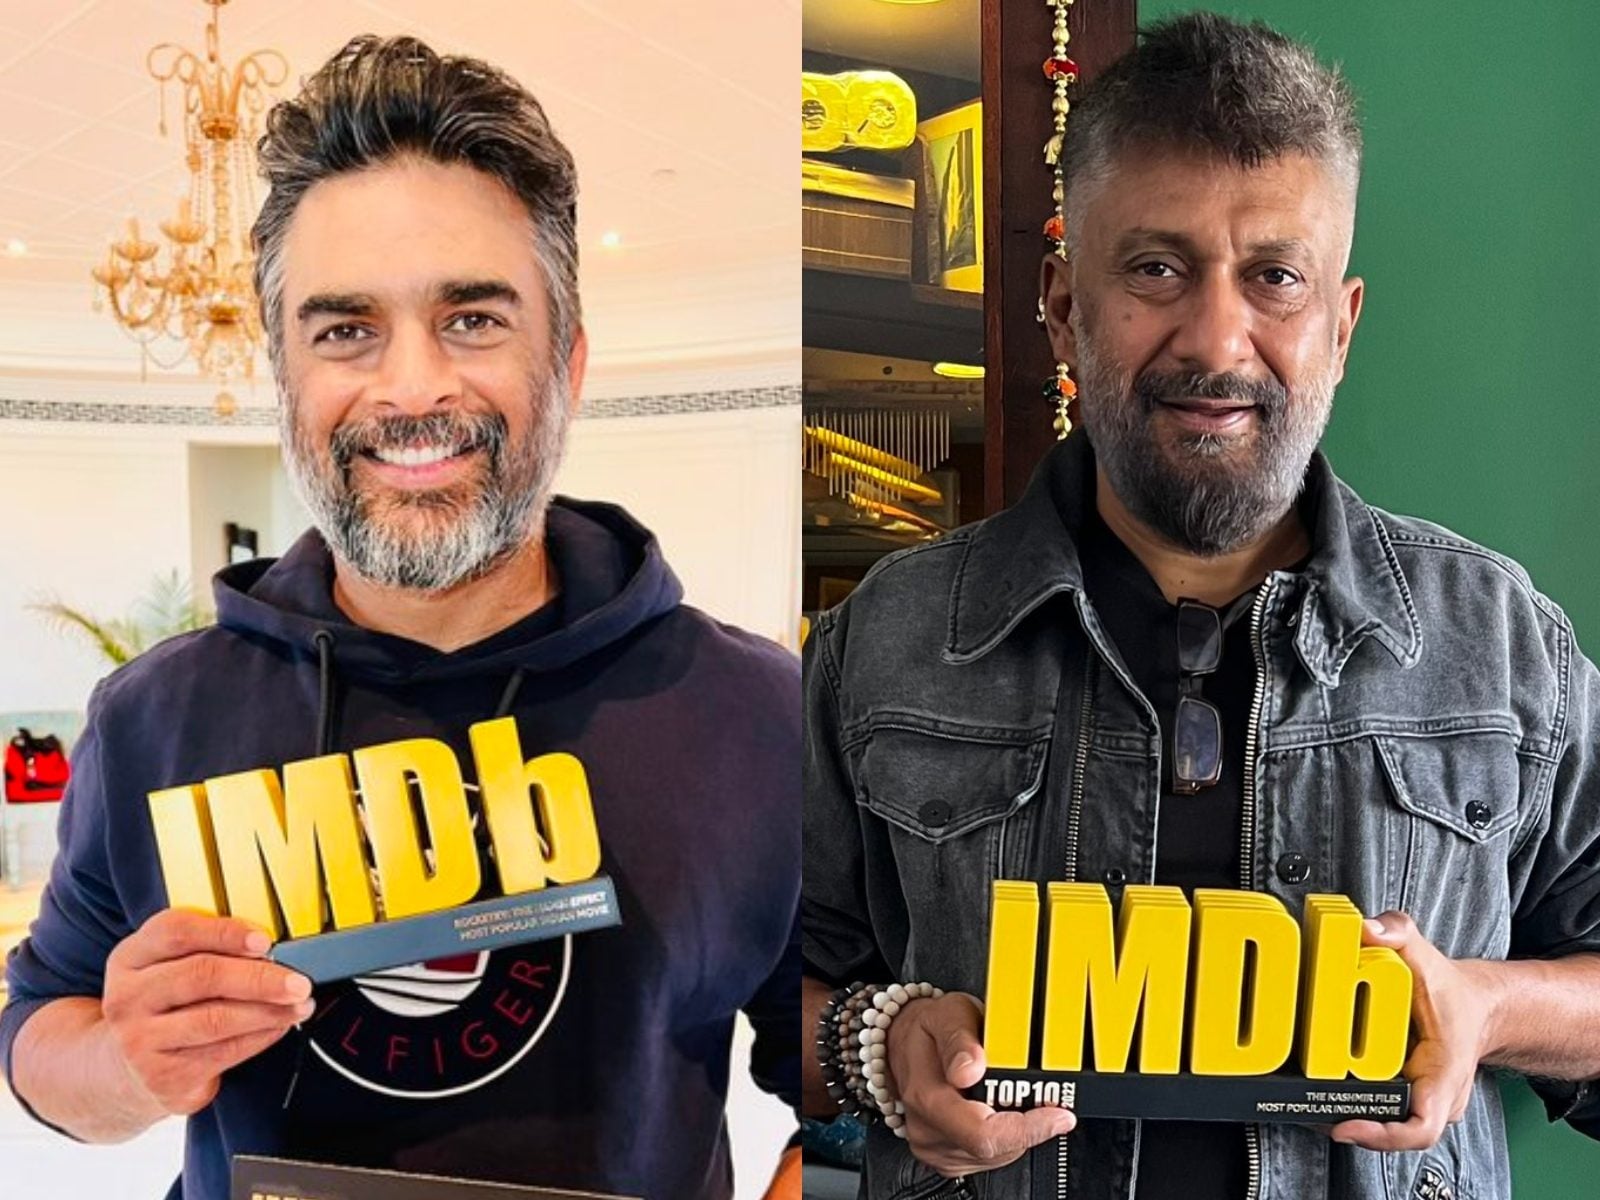 IMDb announces the most popular Indian Movies and Web Series of 2022